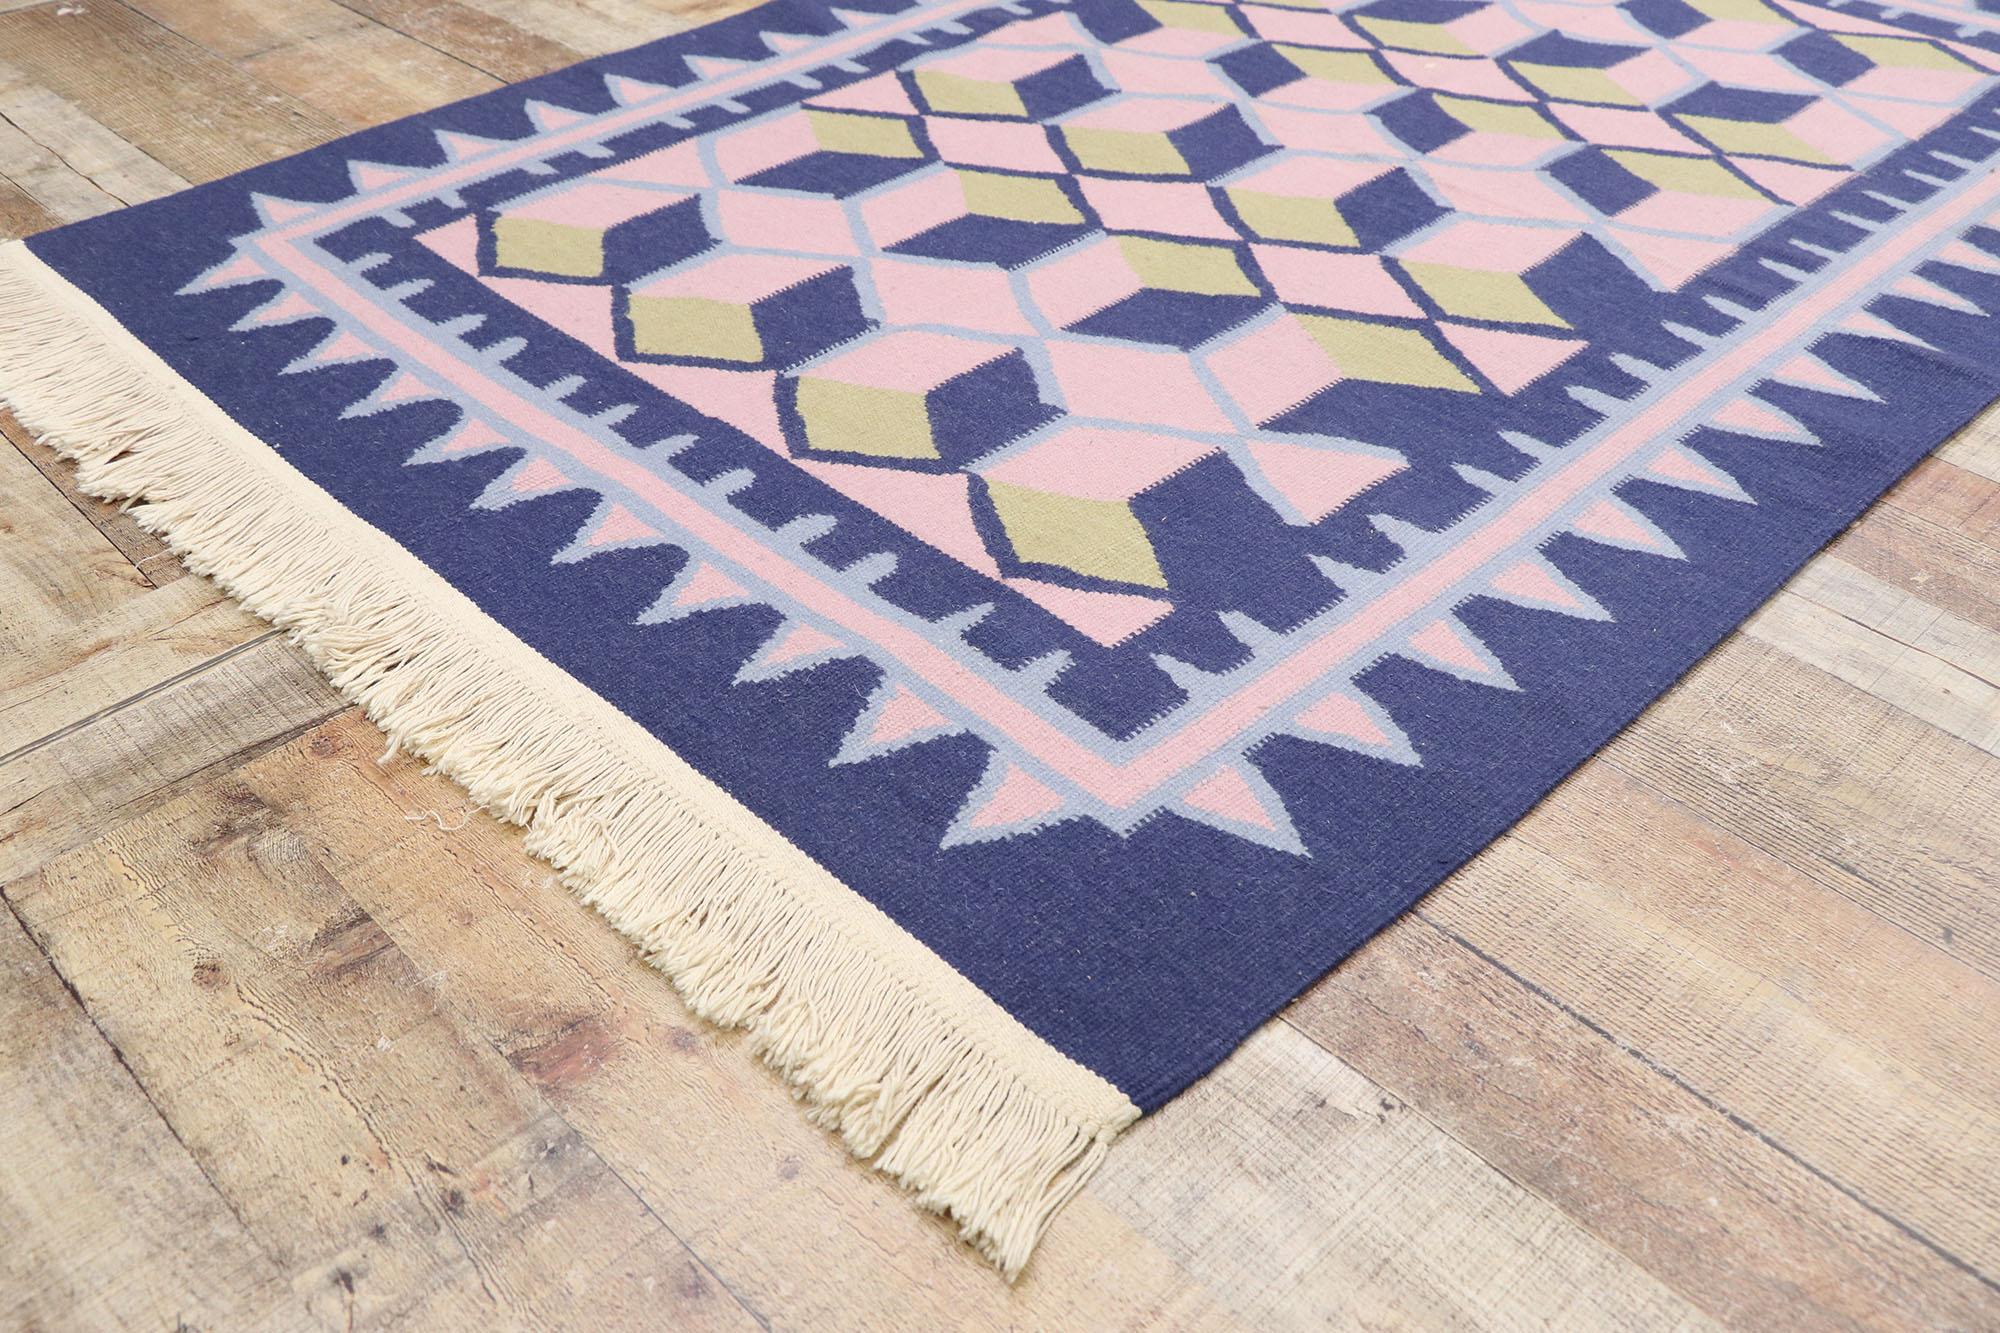 20th Century Vintage Chinese Geometric Kilim Rug with Post-Modern Cubist Style